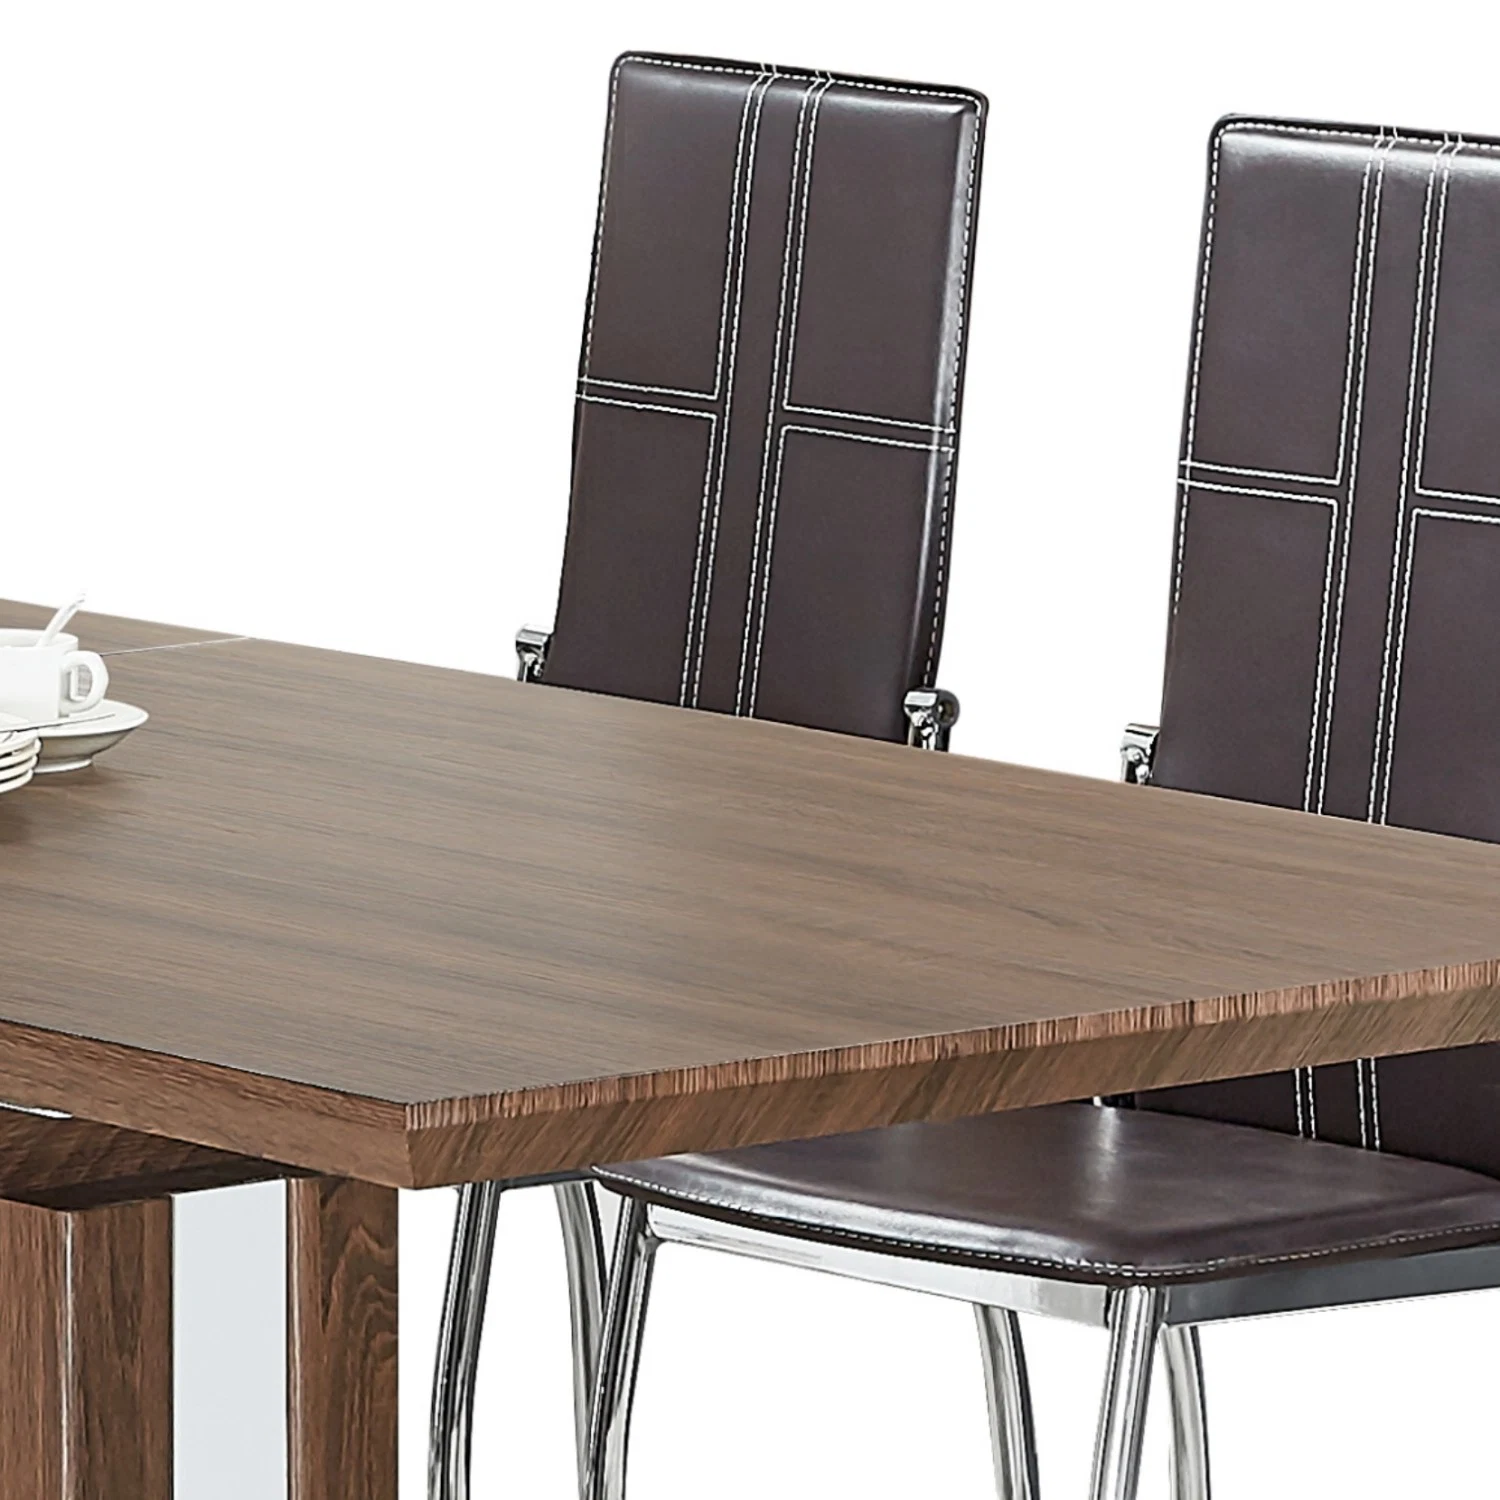 New Brown White MDF 3D Paper Dining Table Set for Dining Set